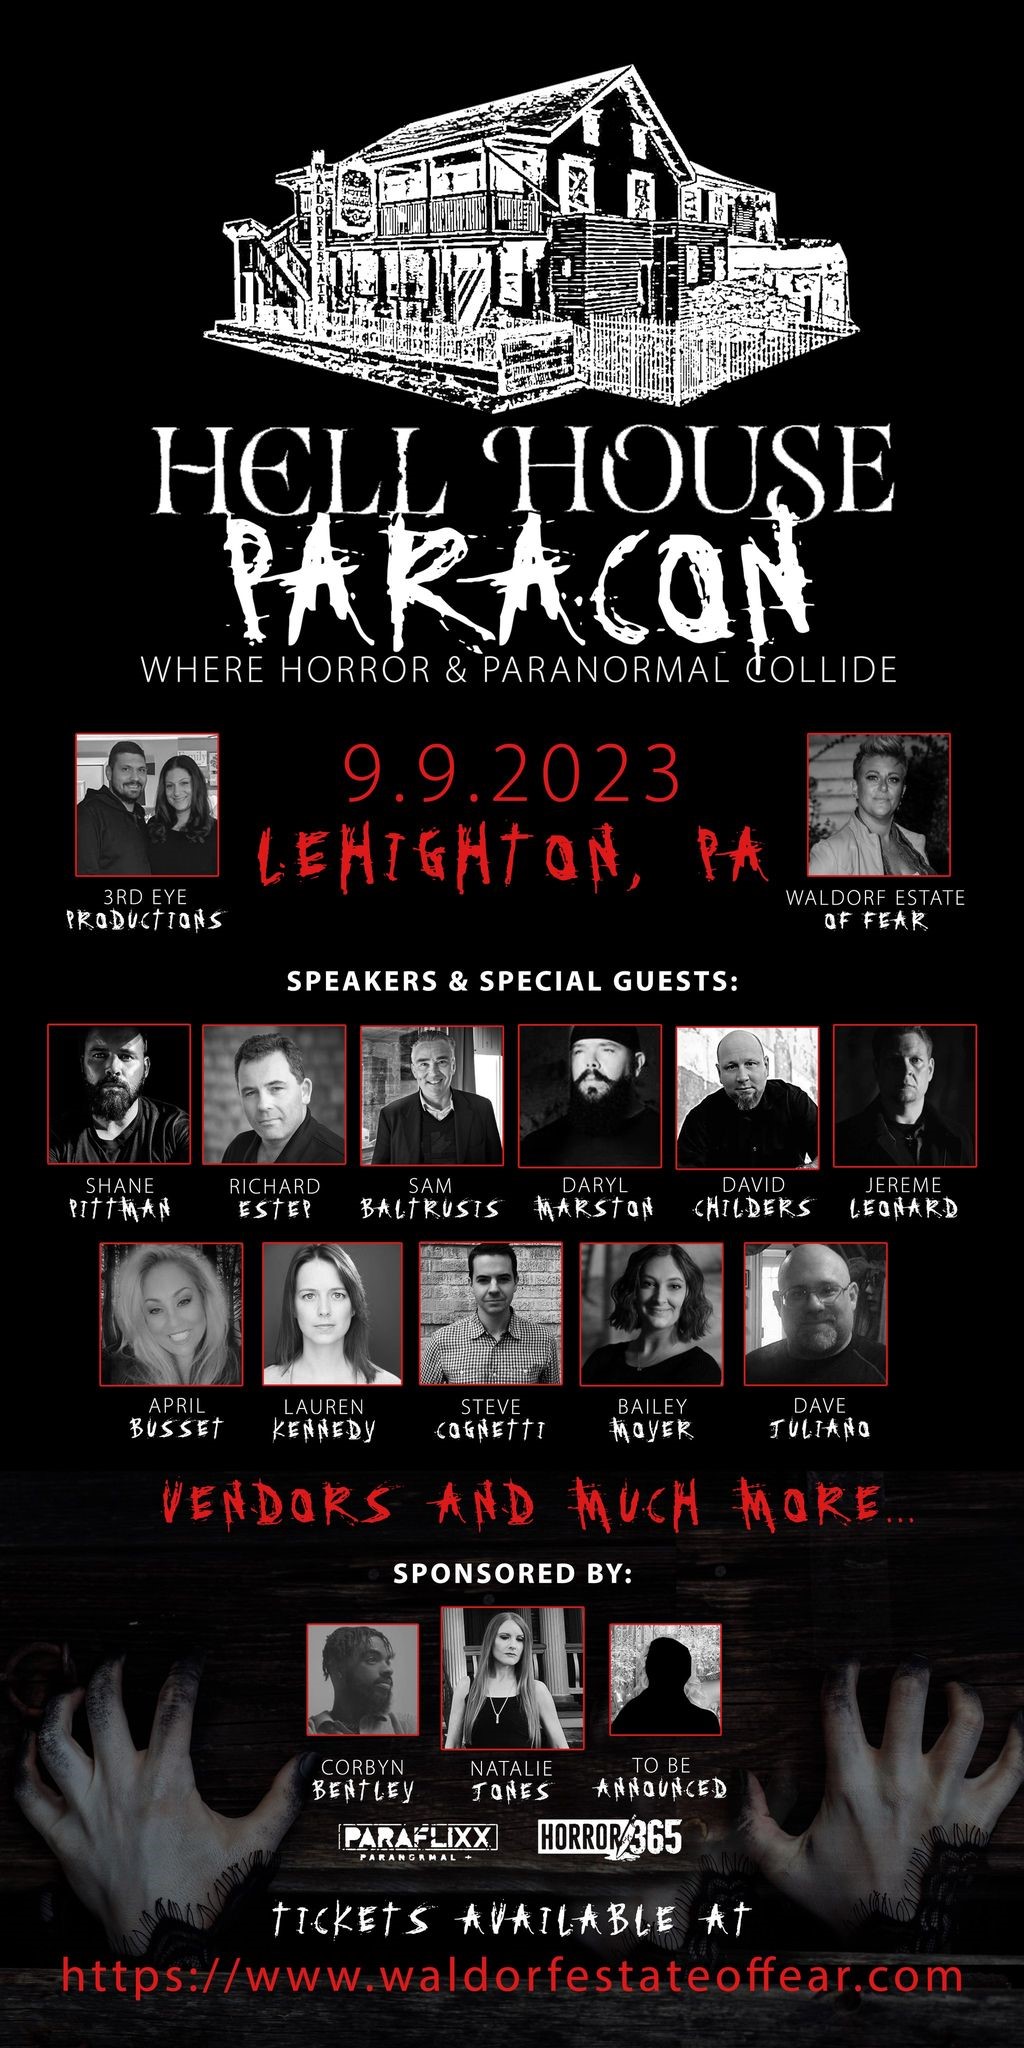 HELL HOUSE PARACON 2023  on Sep 09, 10:00@Hell House- Waldorf Estate of Fear - Buy tickets and Get information on Thriller Events thriller.events